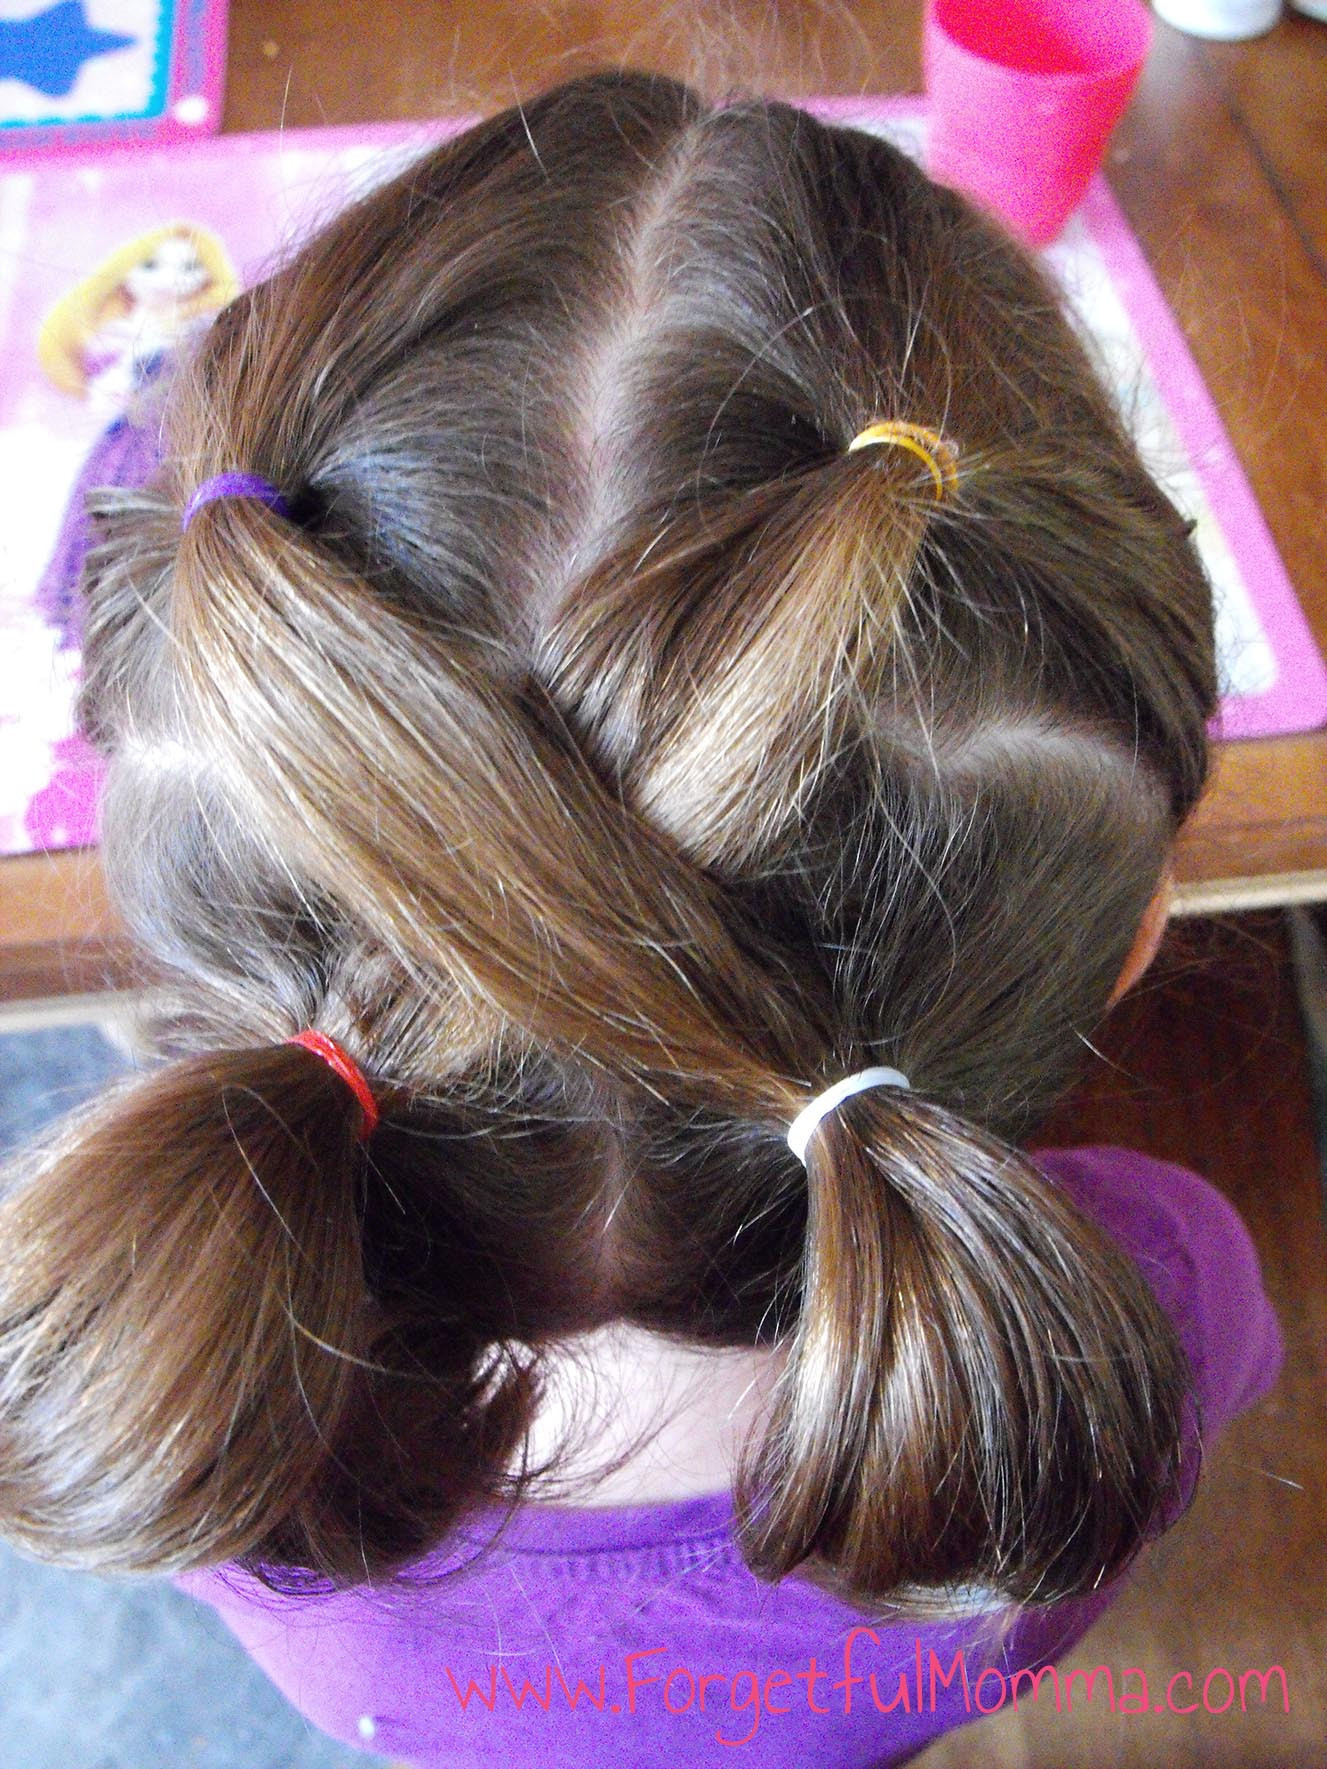 Girls Hairstyles For School
 Back to School Hair for Little Girls For ful Momma